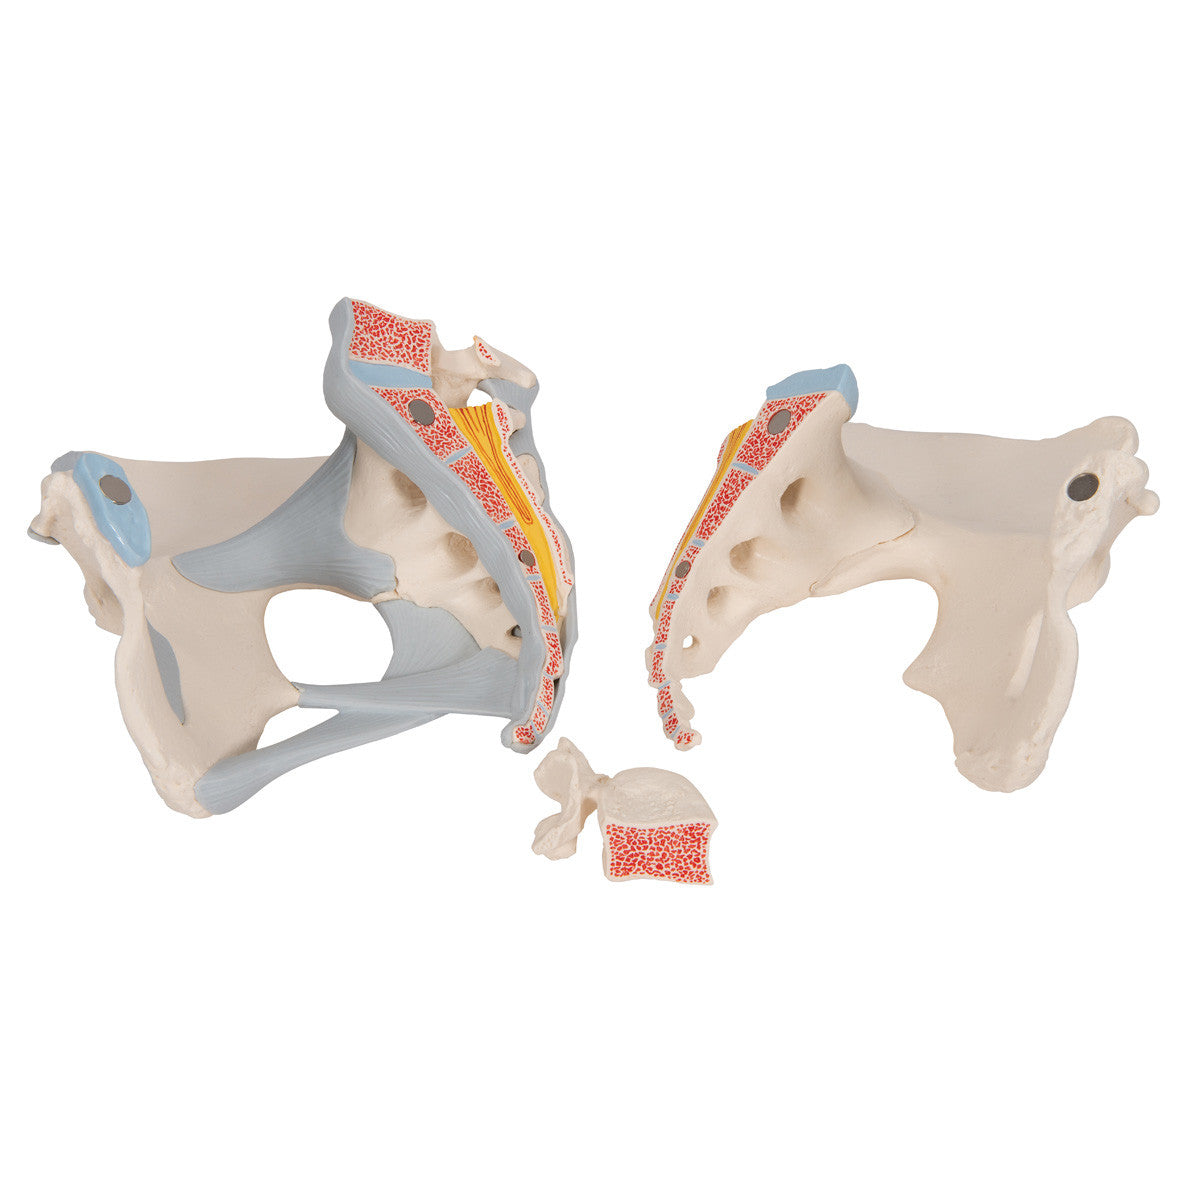 Female Pelvis Skeleton Model with Ligaments, 3 part - separated